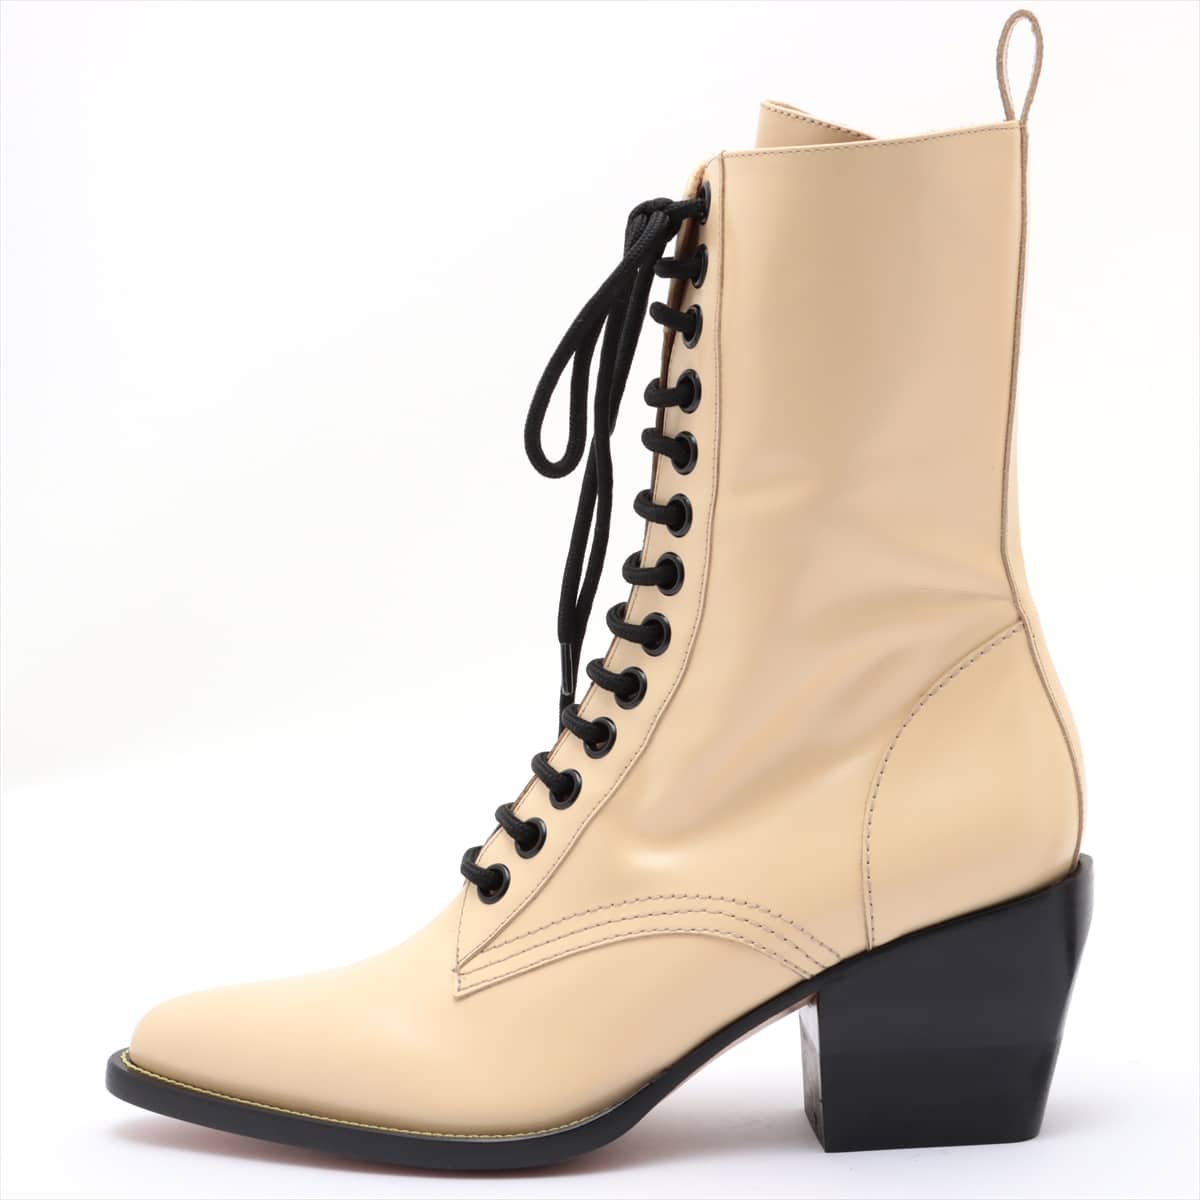 Chloe Leather Boots 40 Men's Yellow gold